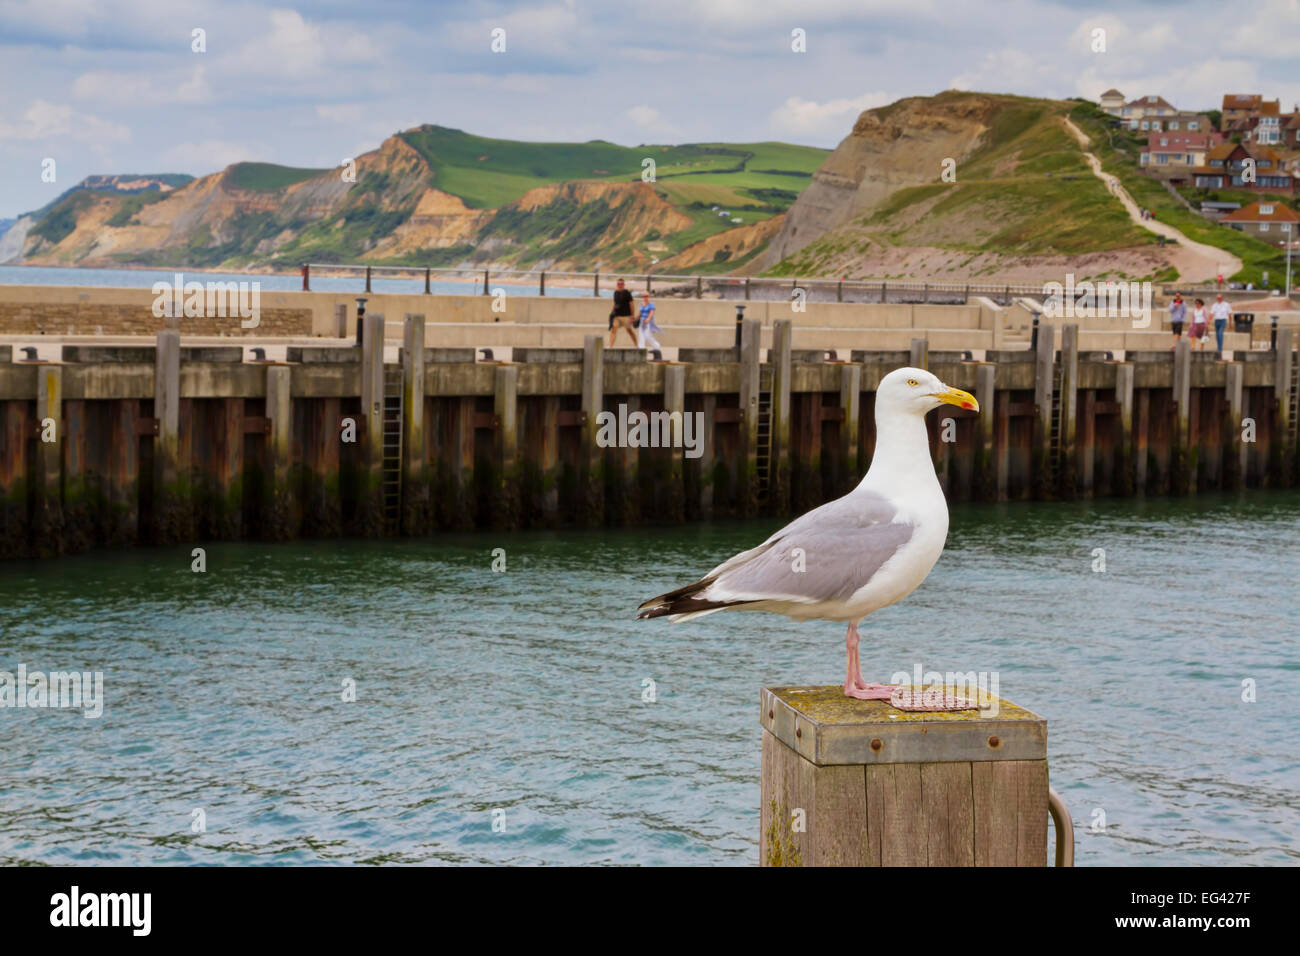 Seagull resting in the foreground of West Bay Harbour with the Dorset cliffs in the background.  England, UK. Stock Photo